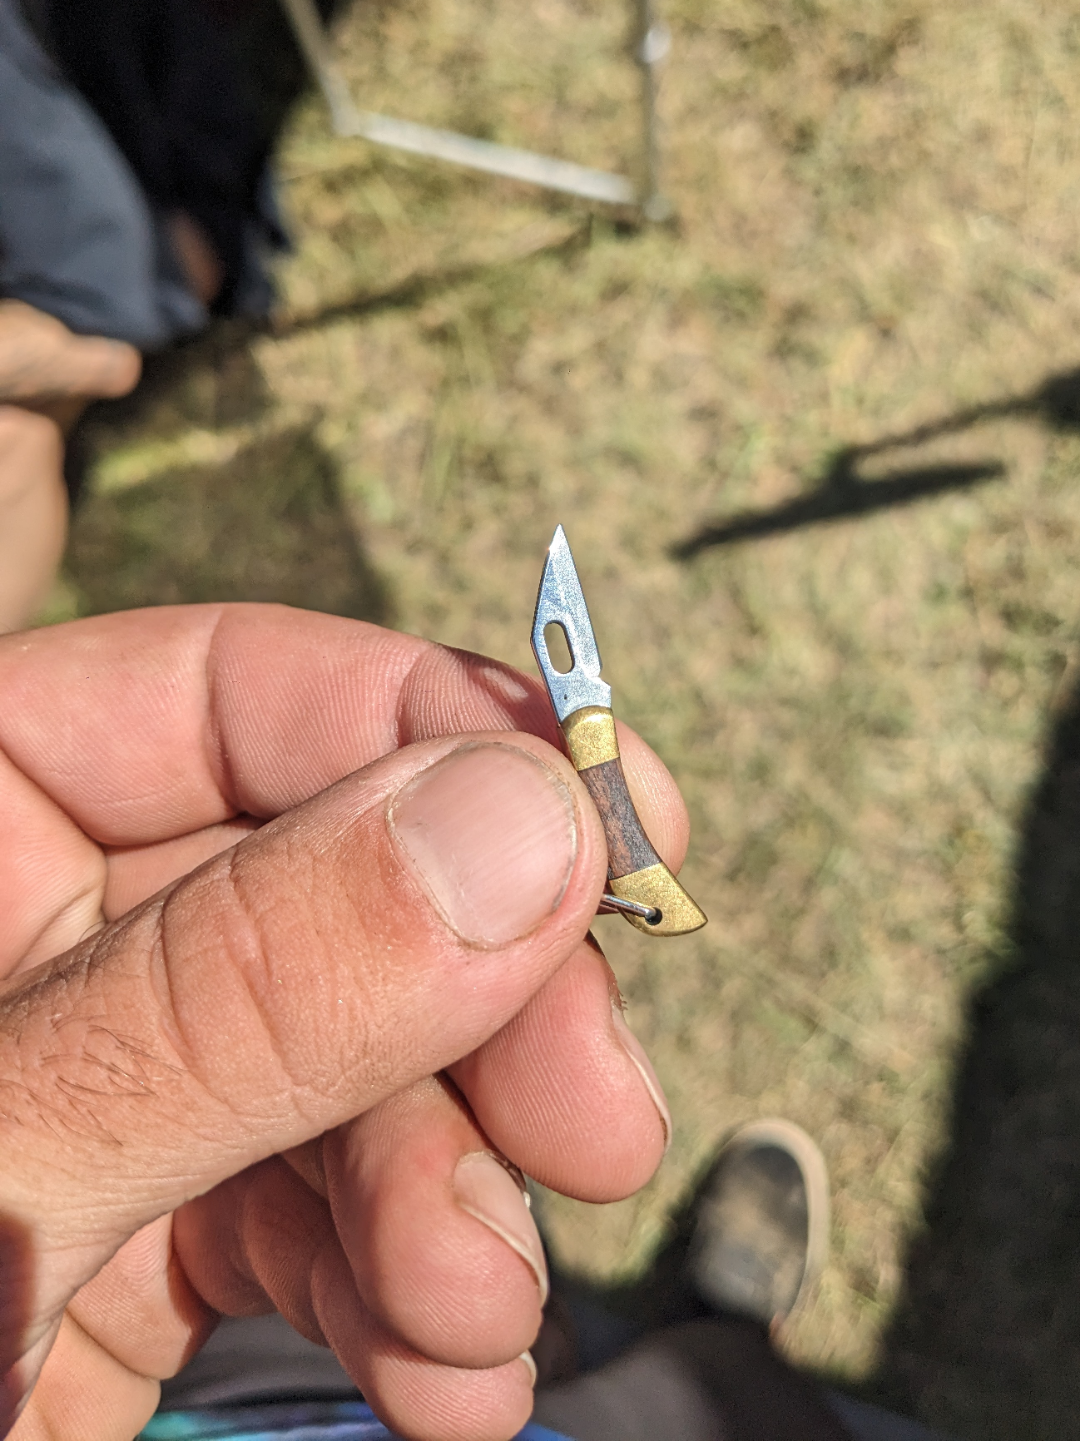 Close-up of a tiny knife that&#x27;s much smaller than the thumb holding it